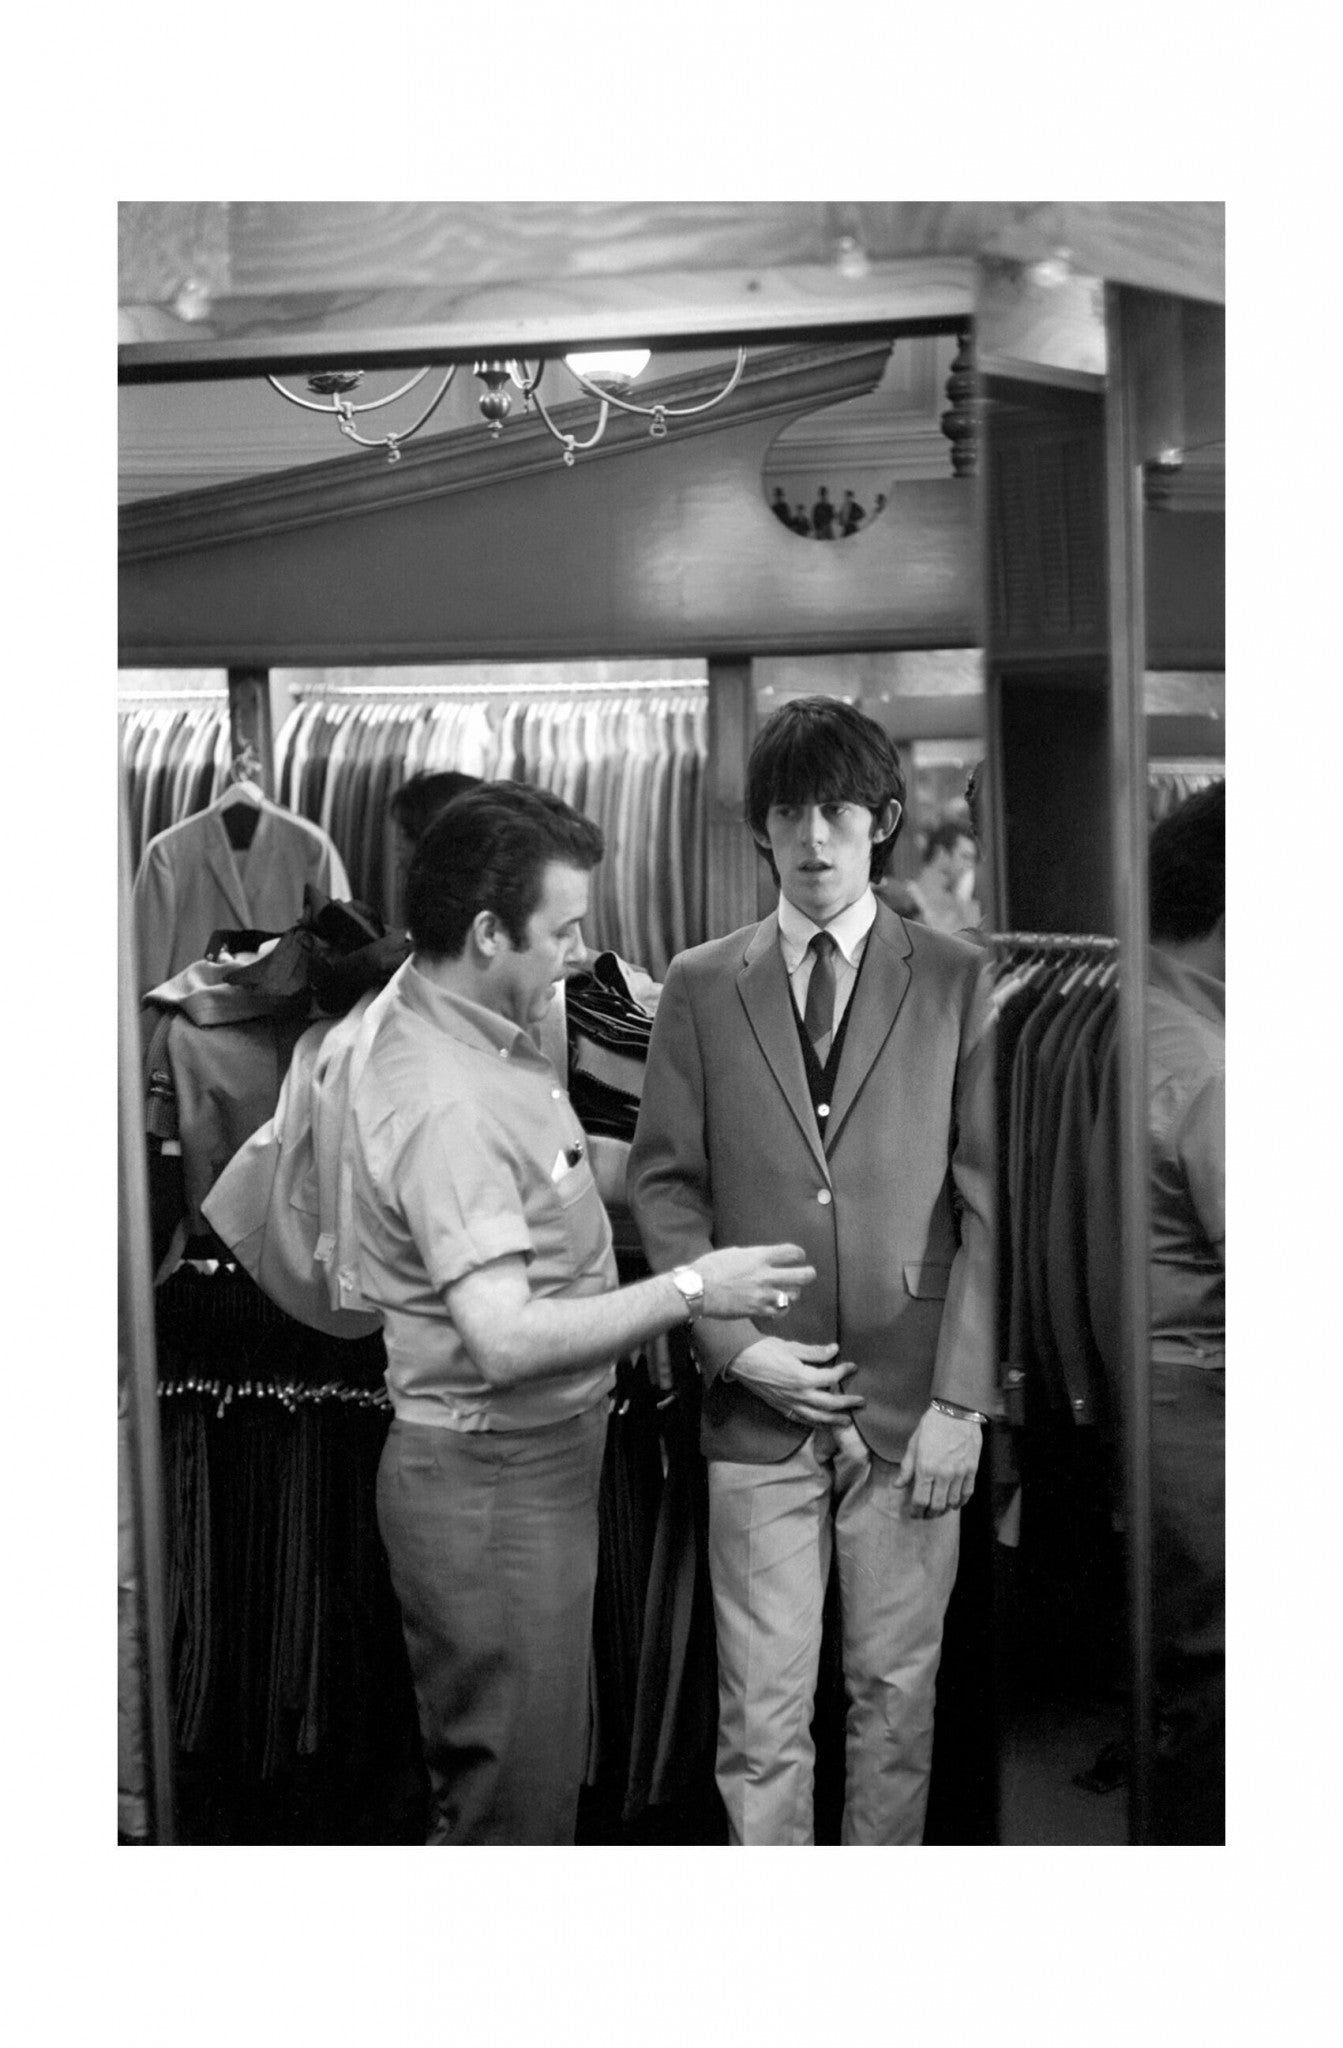 The Rolling Stones - Keith Richards Clothes Shopping, USA, 1960s Print